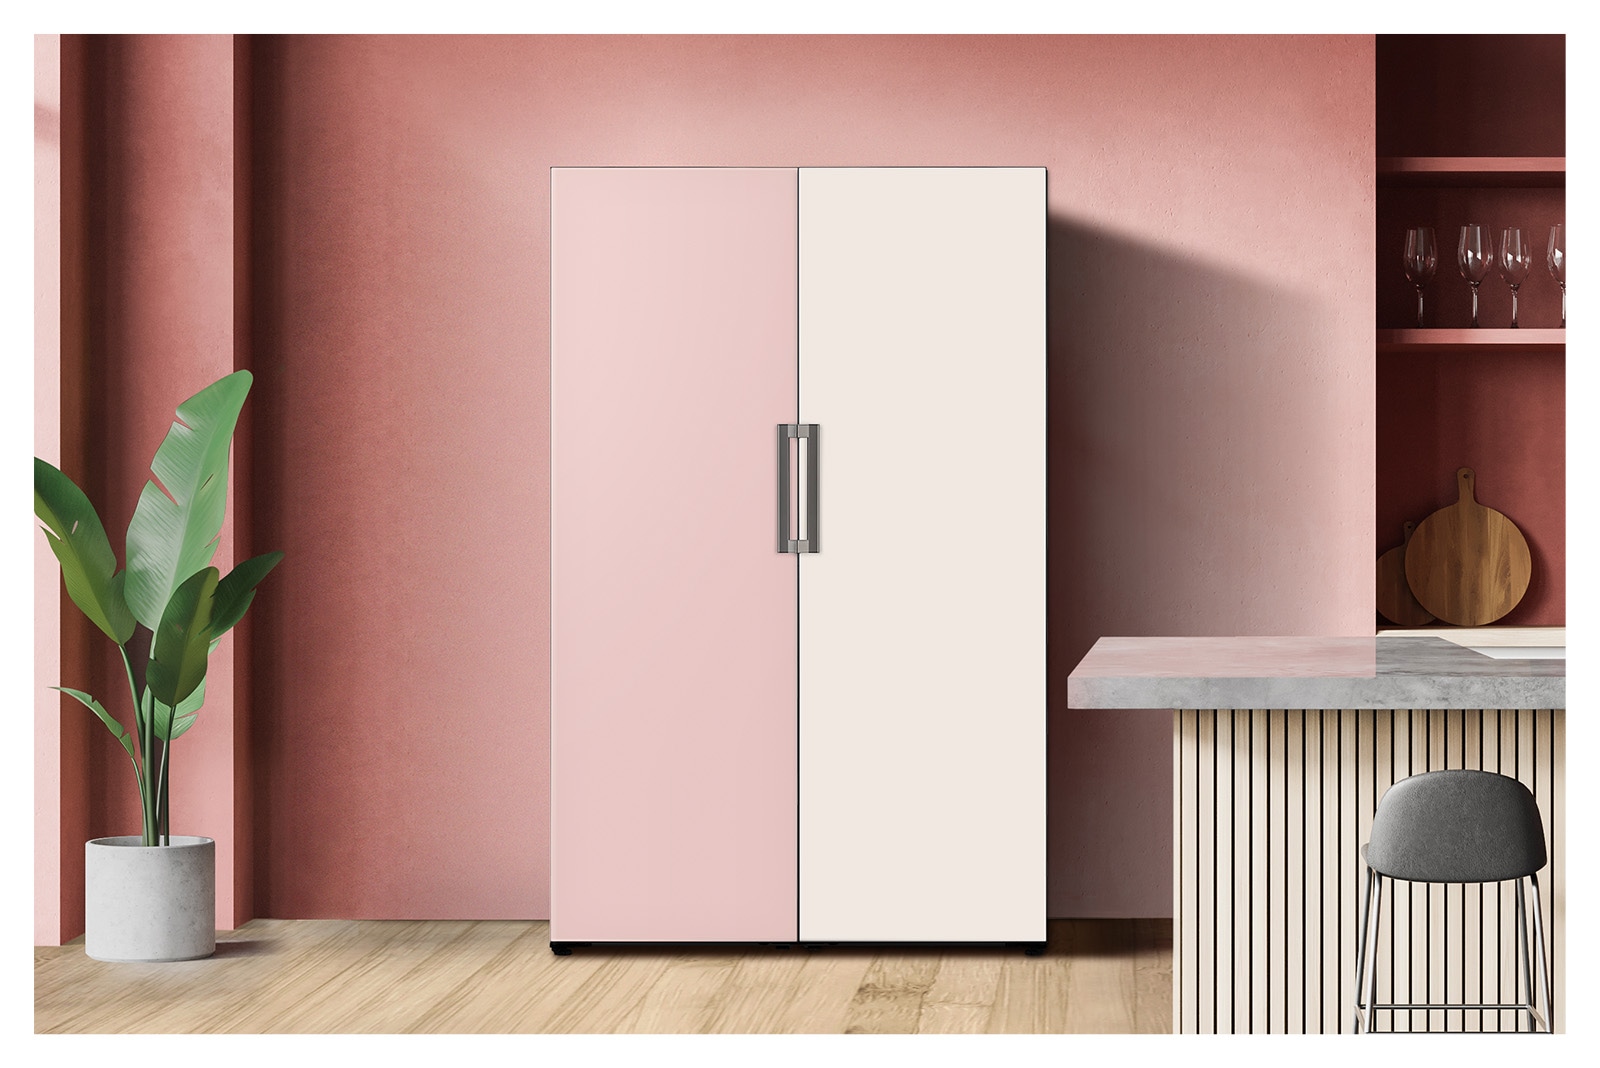 It shows mist pink and mist beige color Freezer placed in the kitchen.